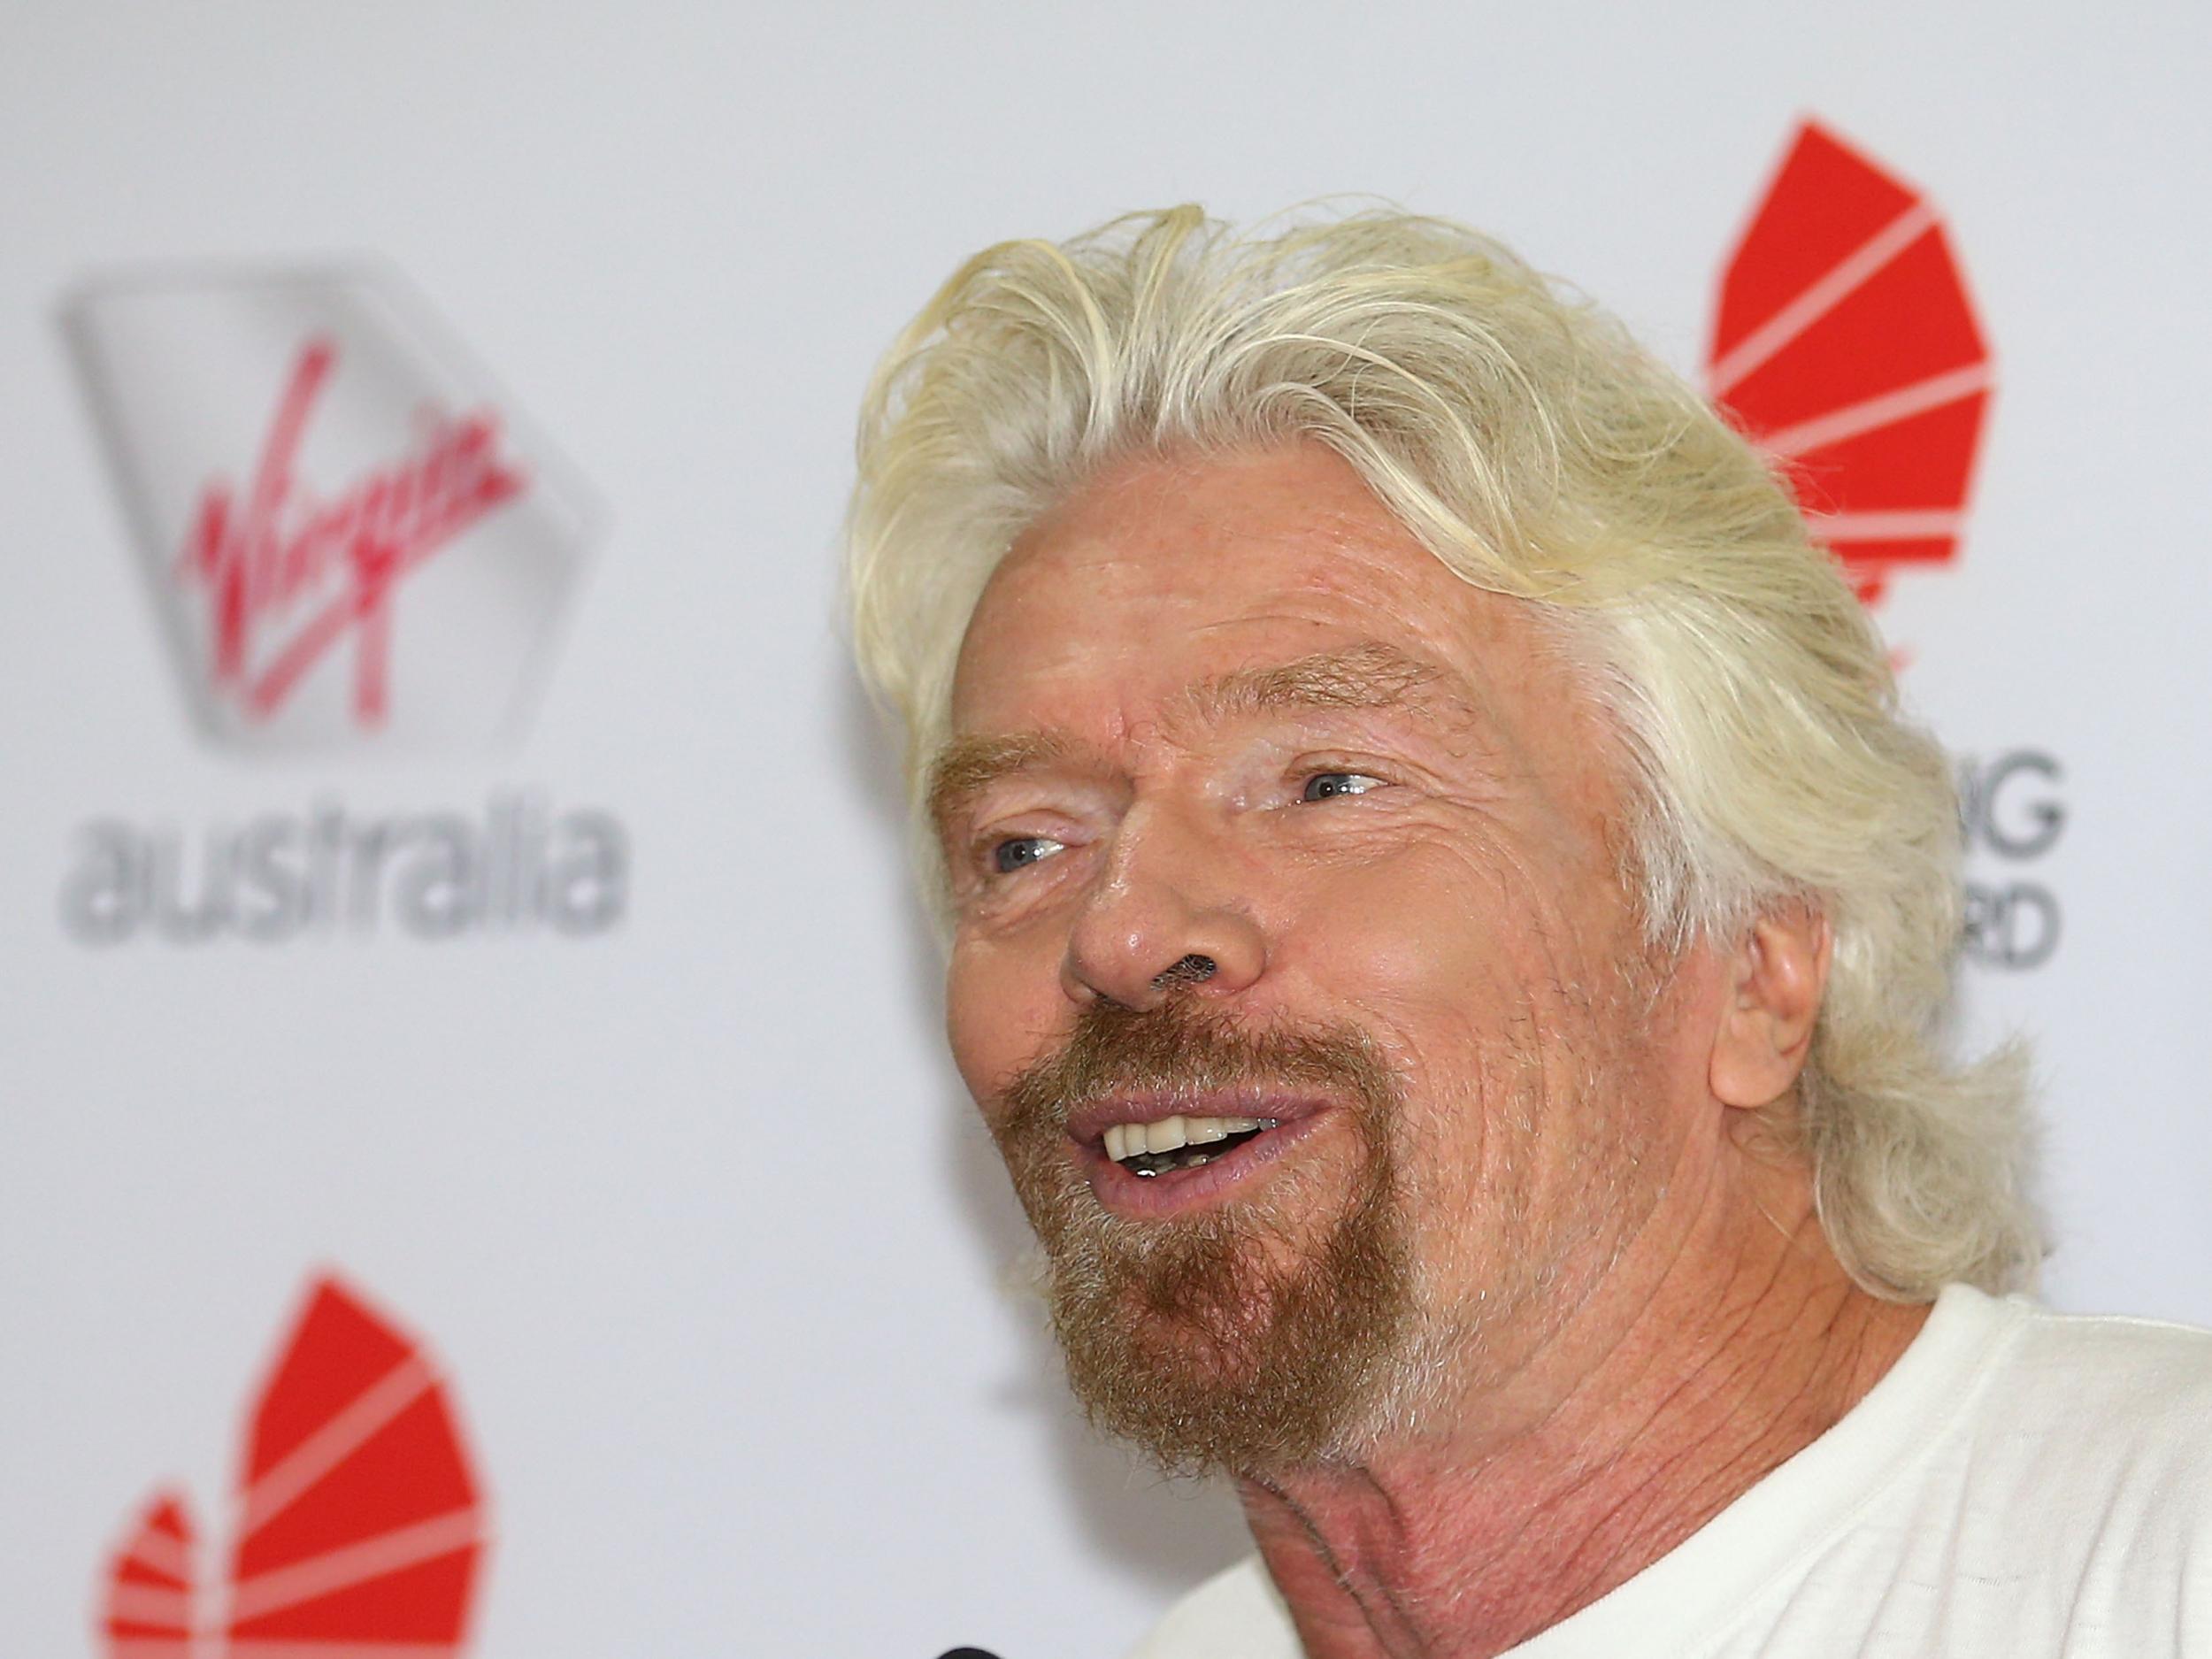 Richard Branson has previously said a universal basic income could boost people's self-esteem